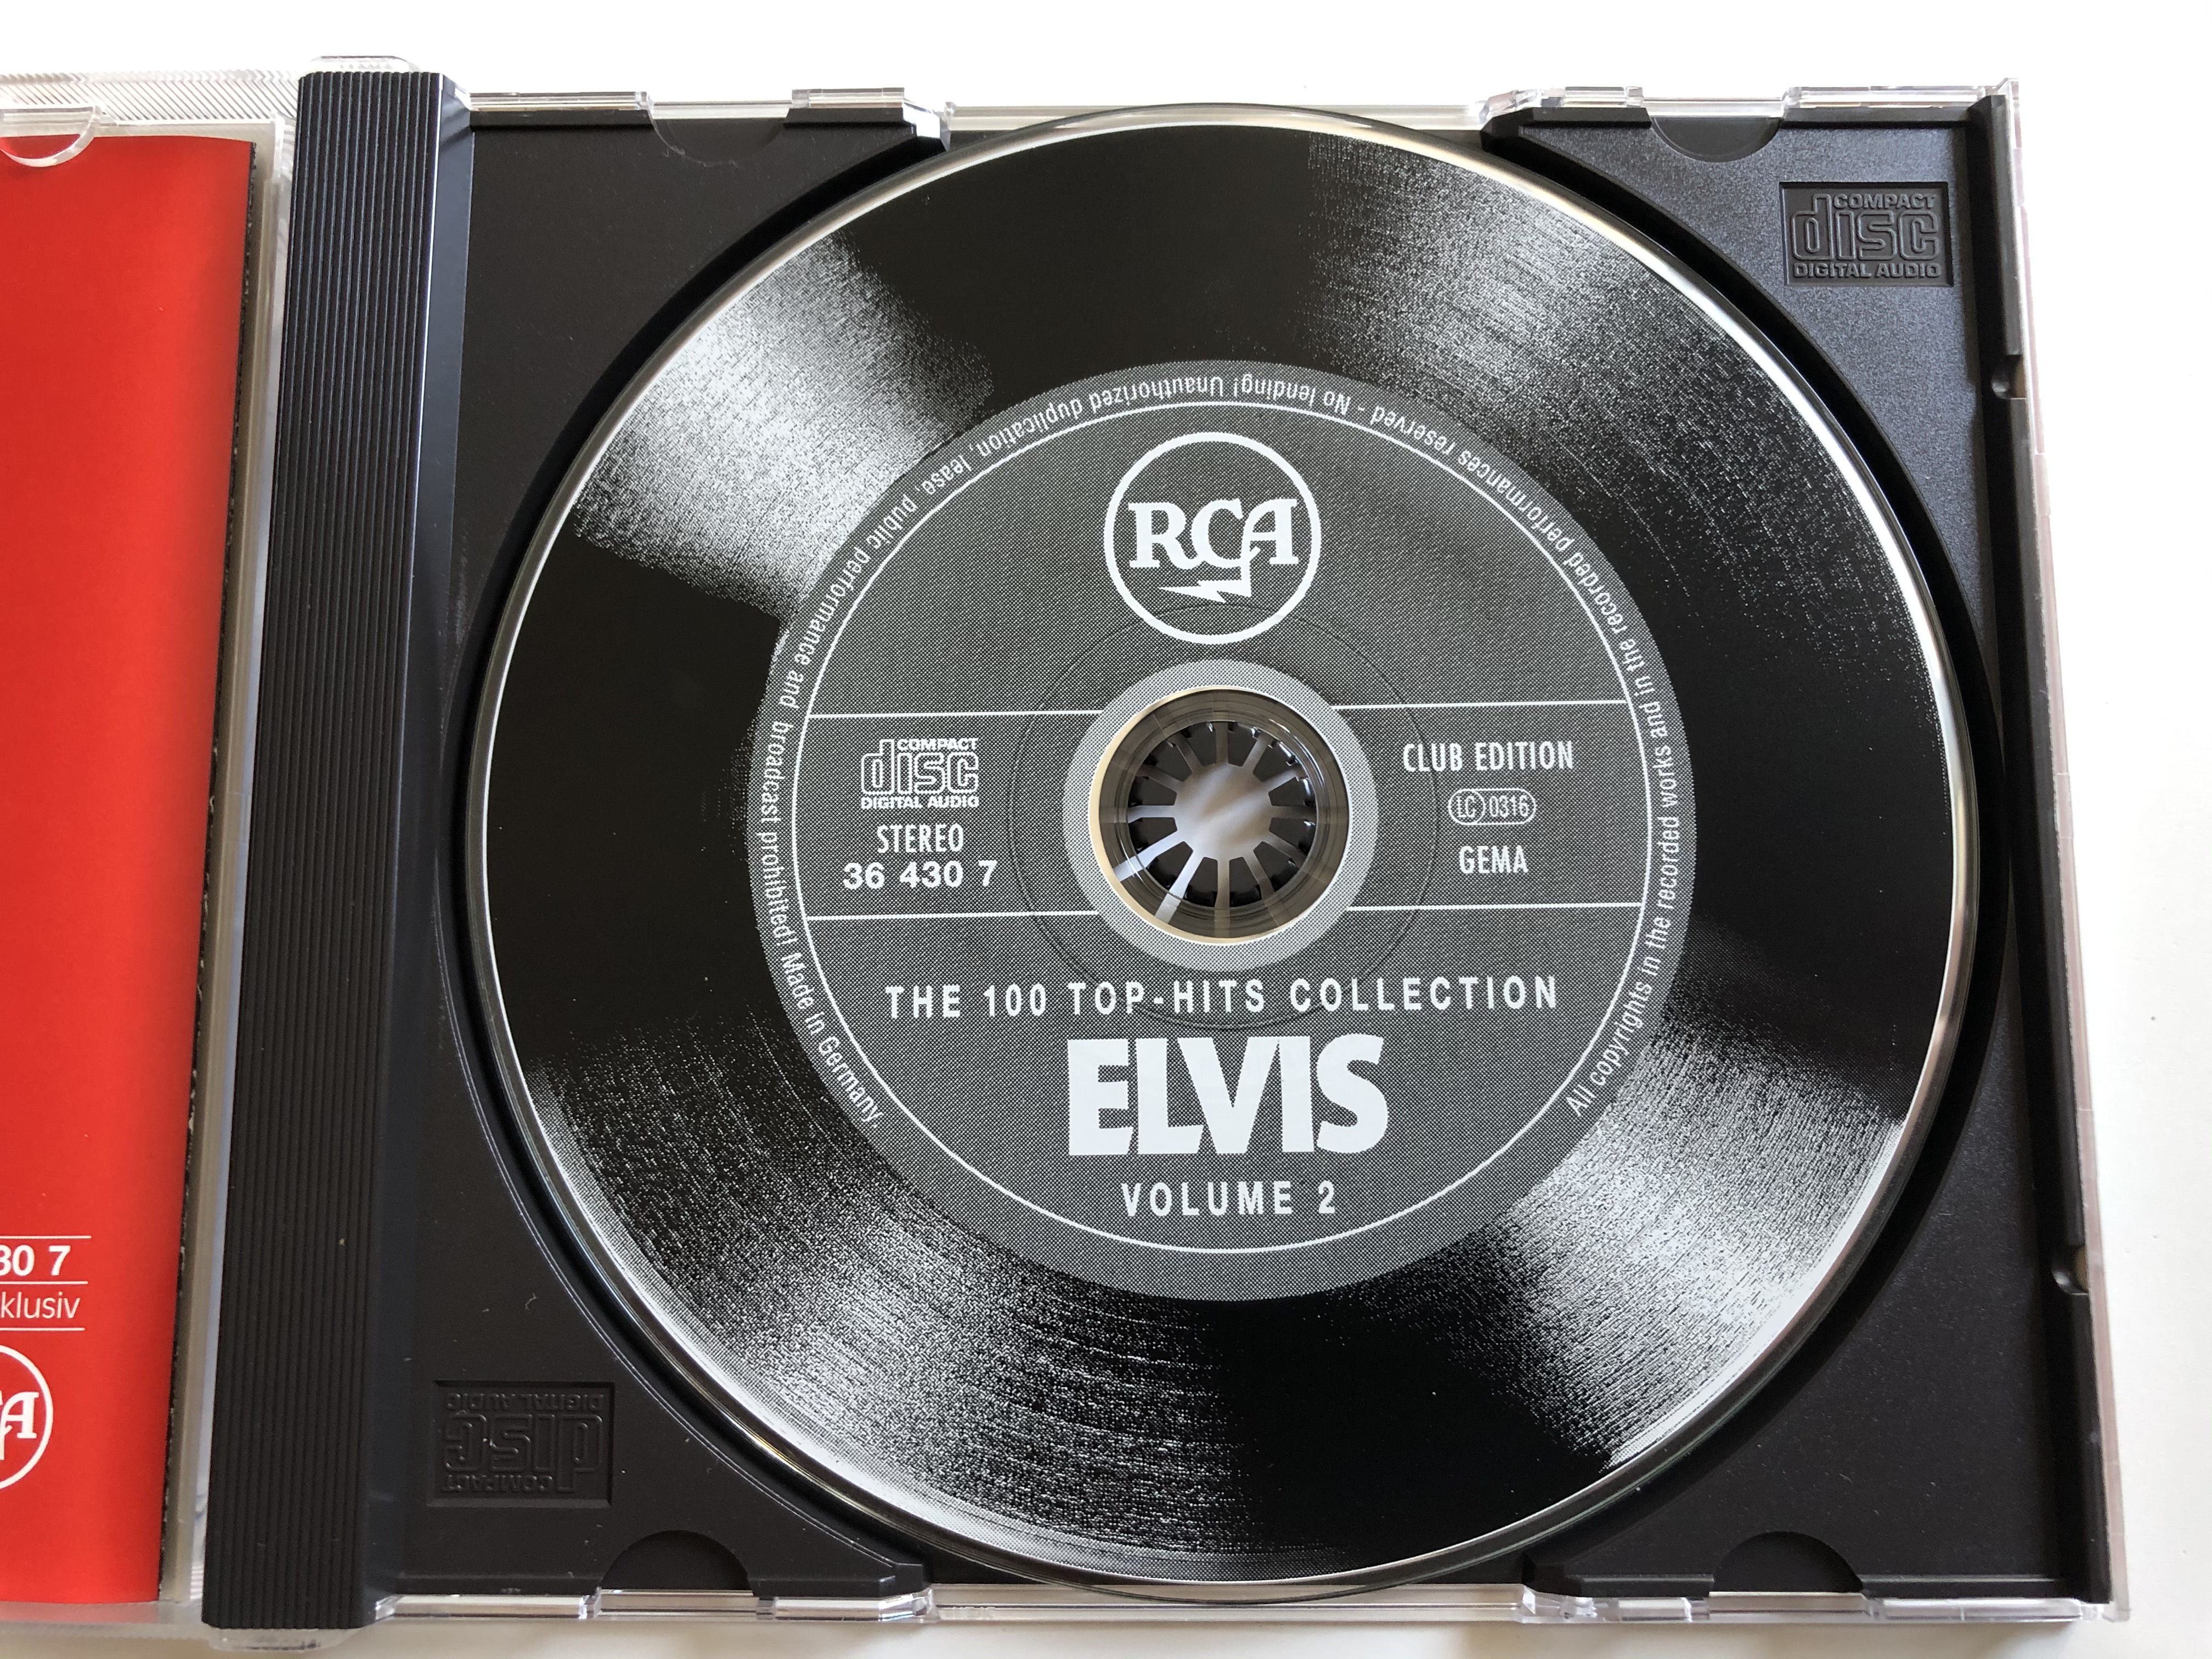 elvis-the-100-top-hits-collection-rca-5x-audio-cd-box-set-1997-stereo-36-428-1-11-.jpg